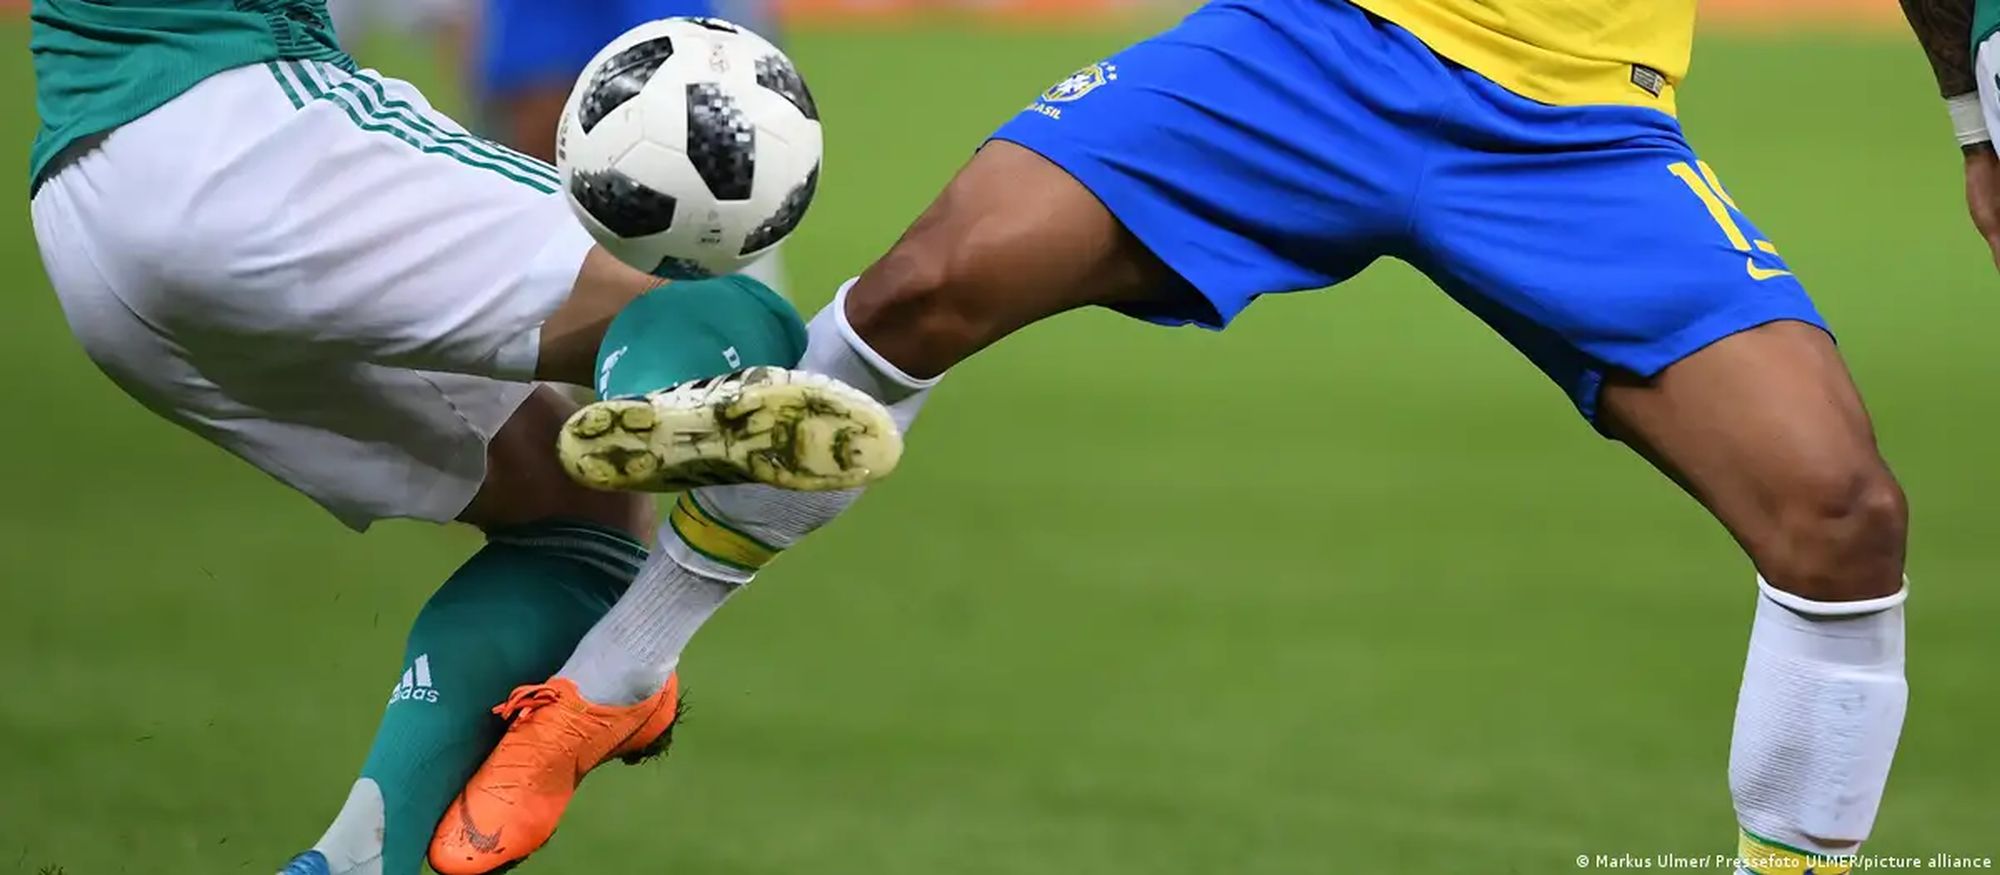 The four legs of two players battle for a soccer ball. Image: Markus Ulmer/ Pressefoto ULMER/picture alliance